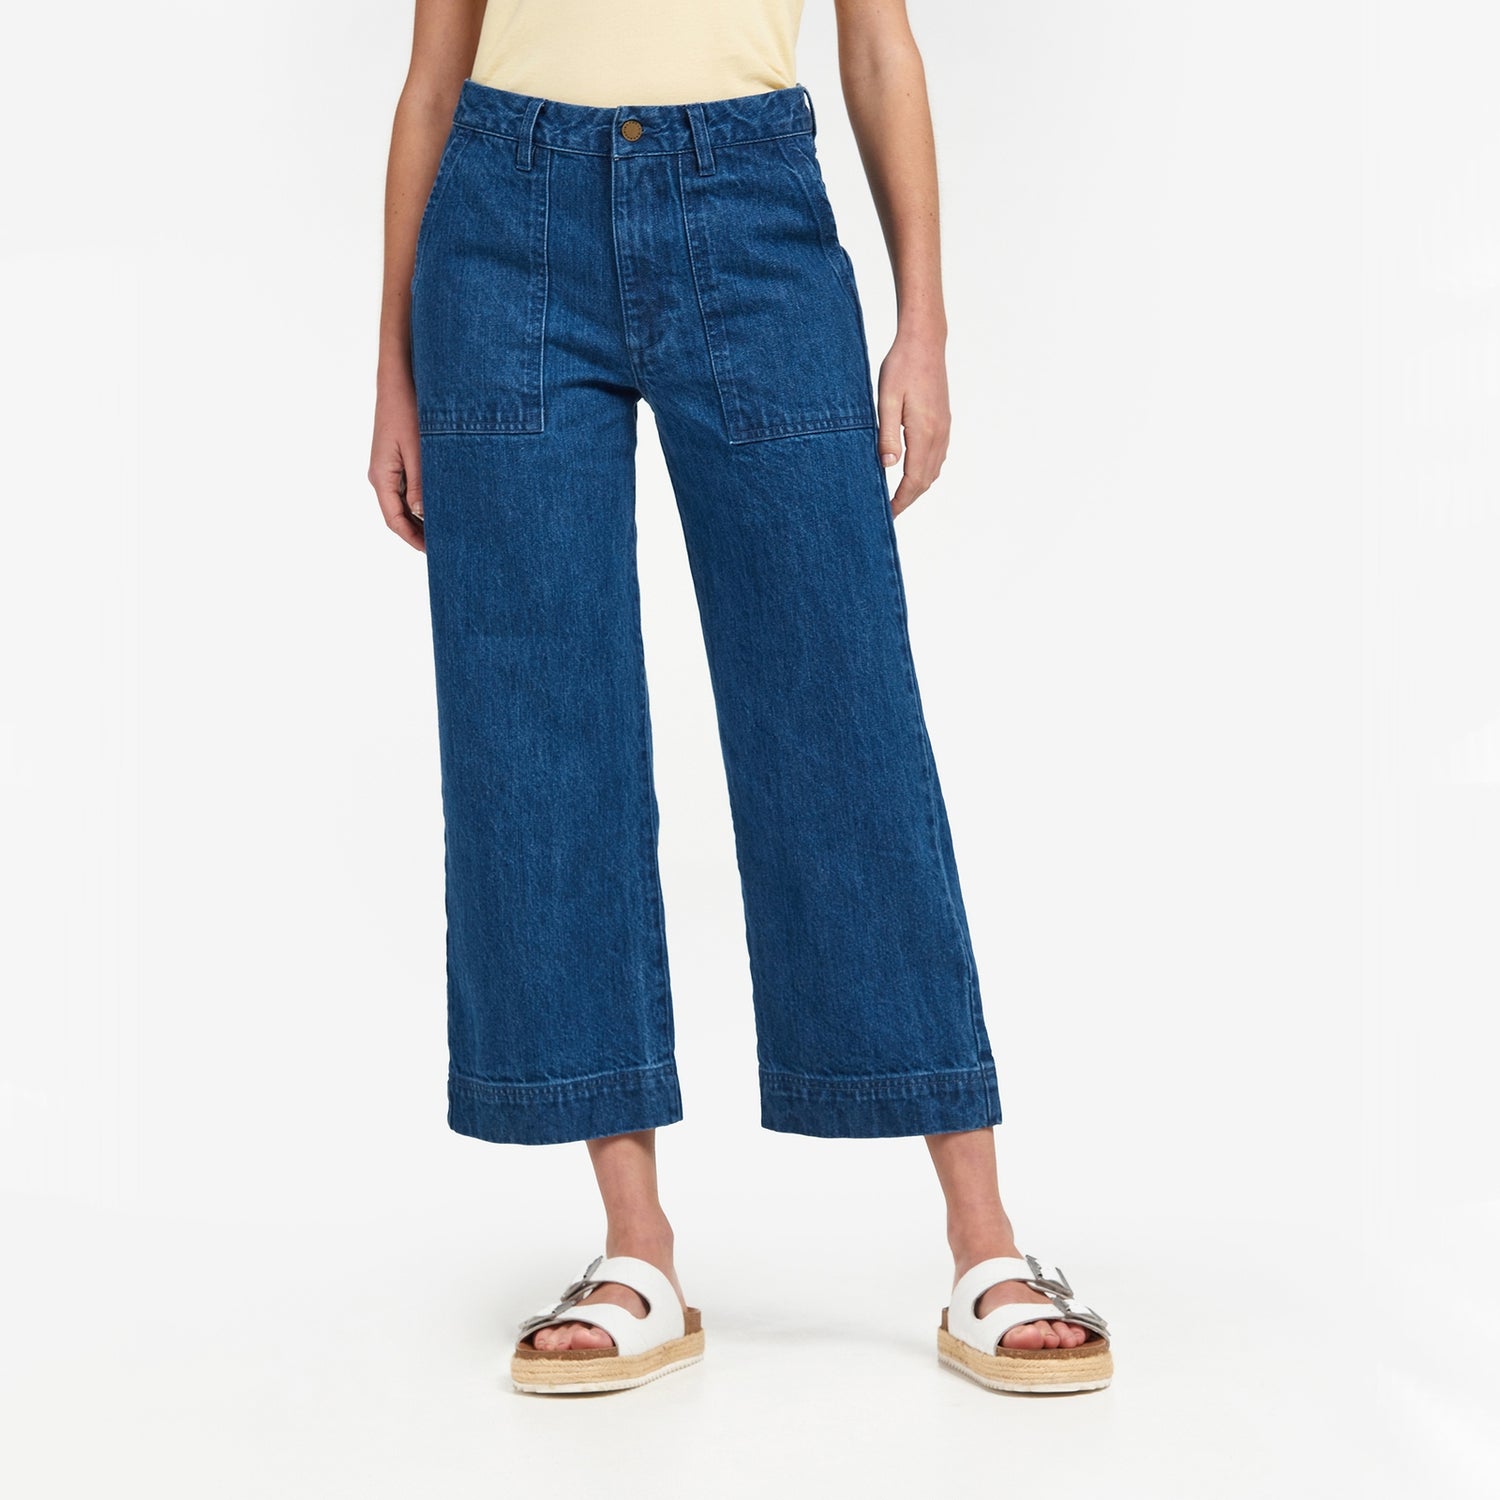 Barbour Southport Cropped Denim Jeans - UK 14